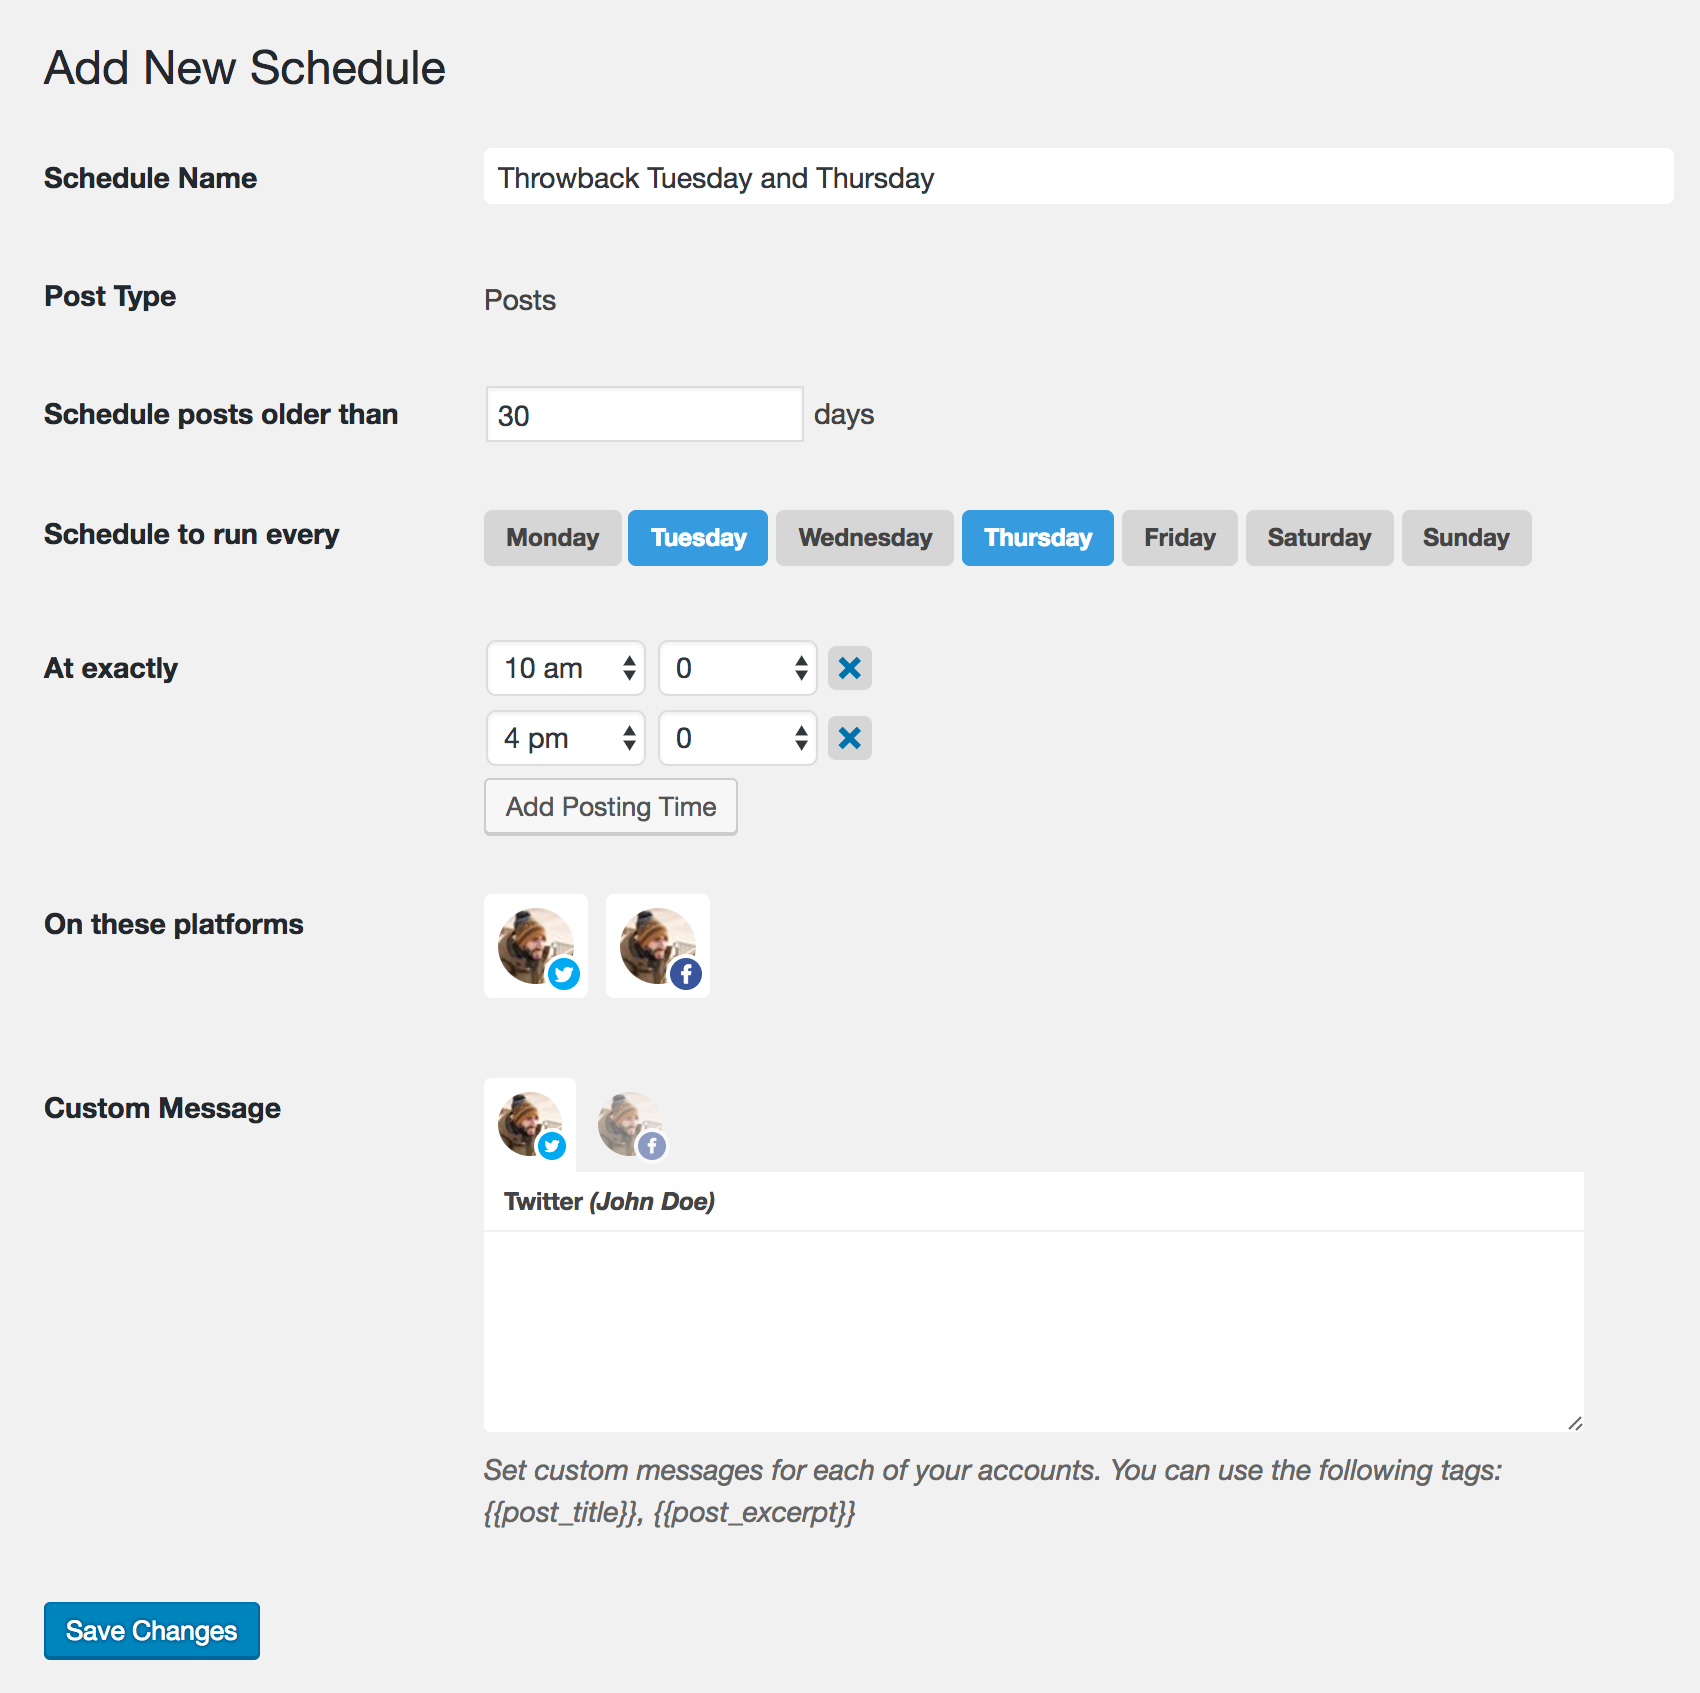 Add New Schedule screen with all the available social share options